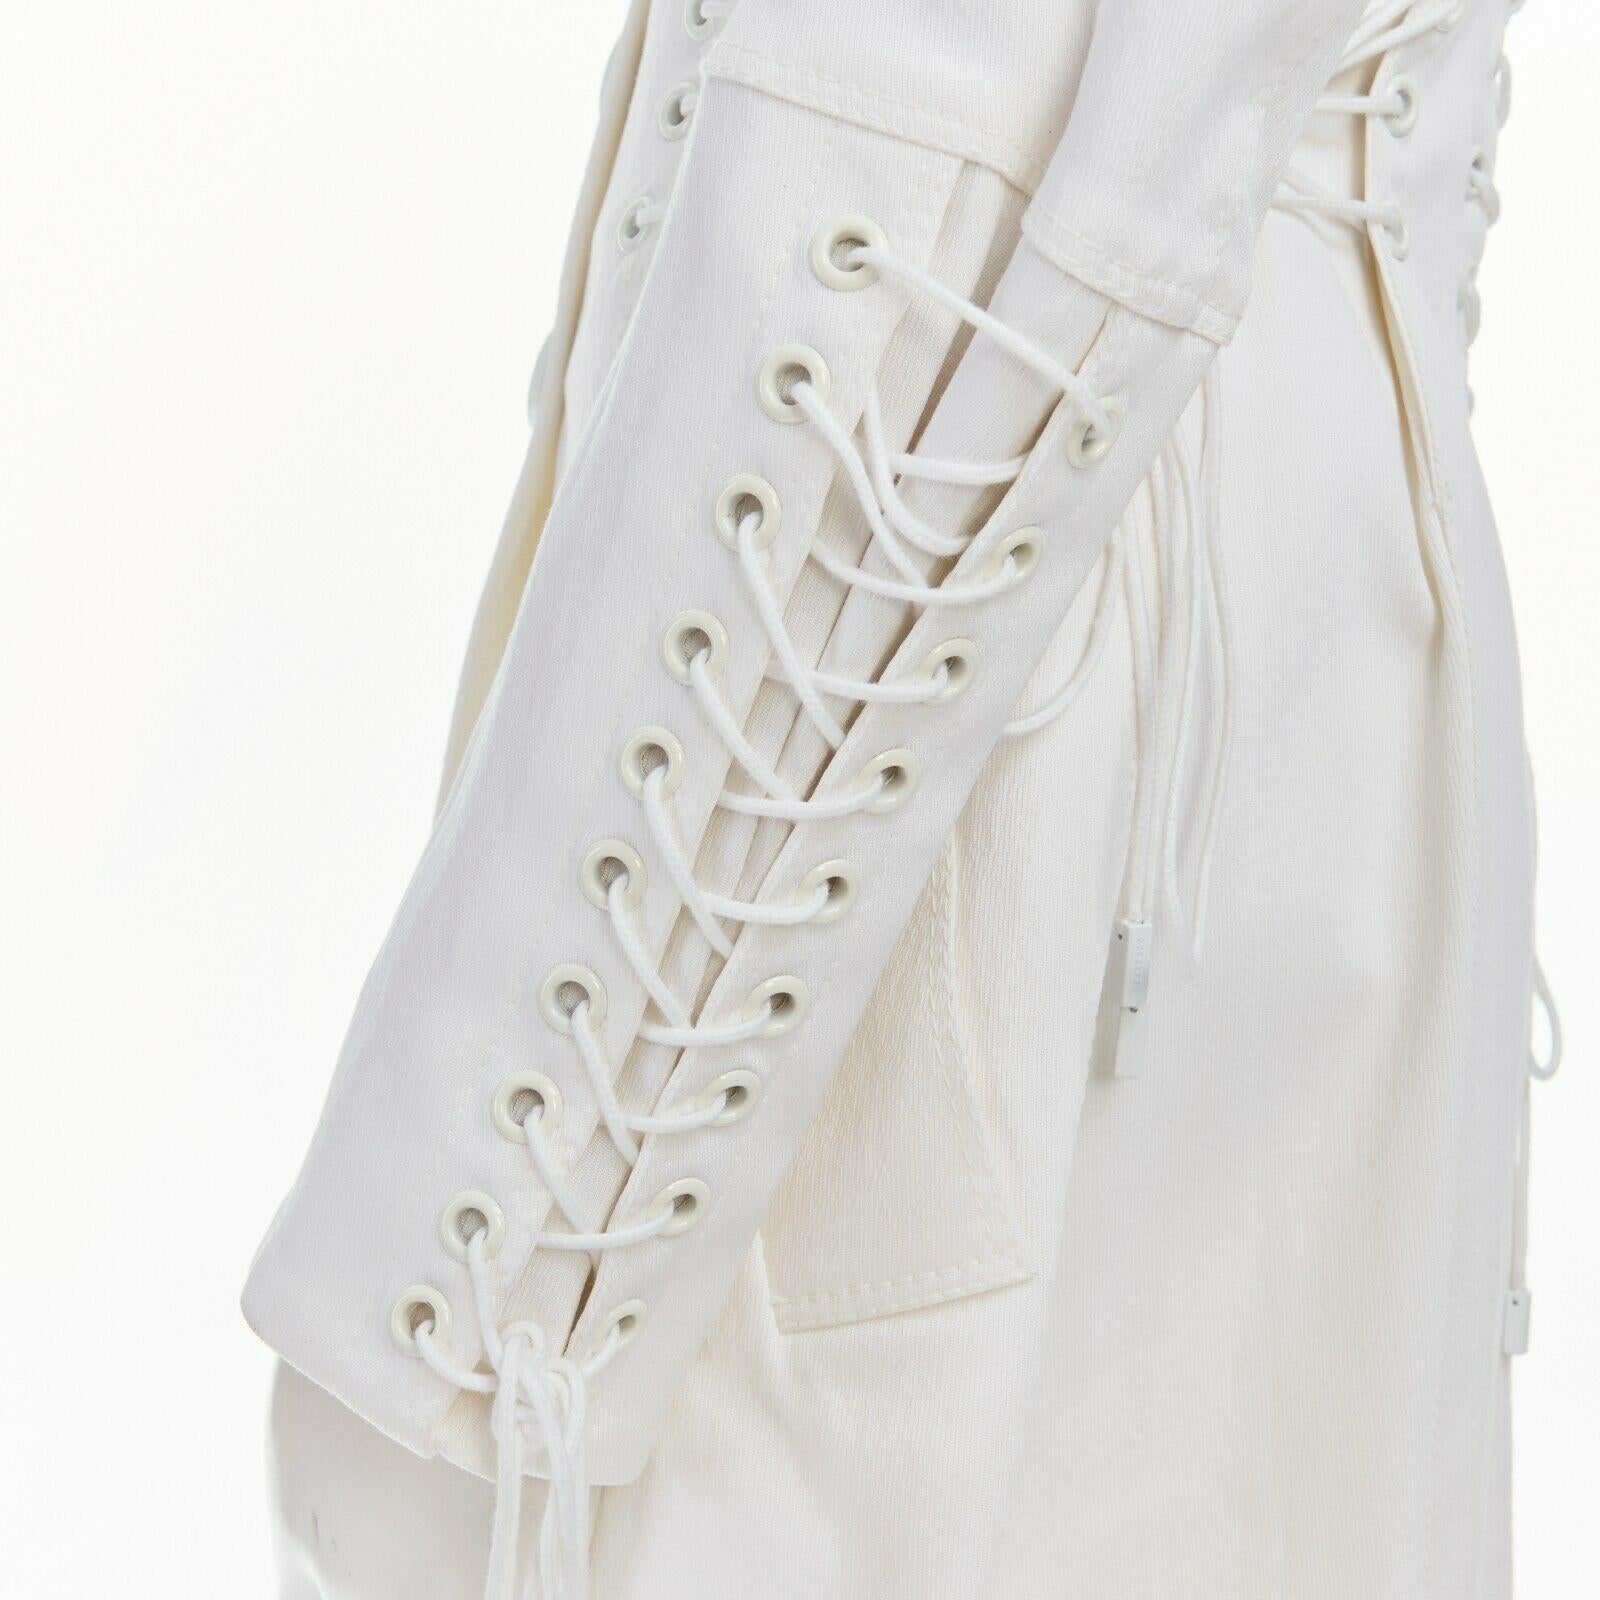 BURBERRY PRORSUM white corset lacing detail button front trench coat IT40 S

BURBERRY PRORSUM
Viscose, lace. White. Spread collar. Button front closure. Enlarged tonal button with Burberry branding. Corset-inspired lace detailing. Dual button front